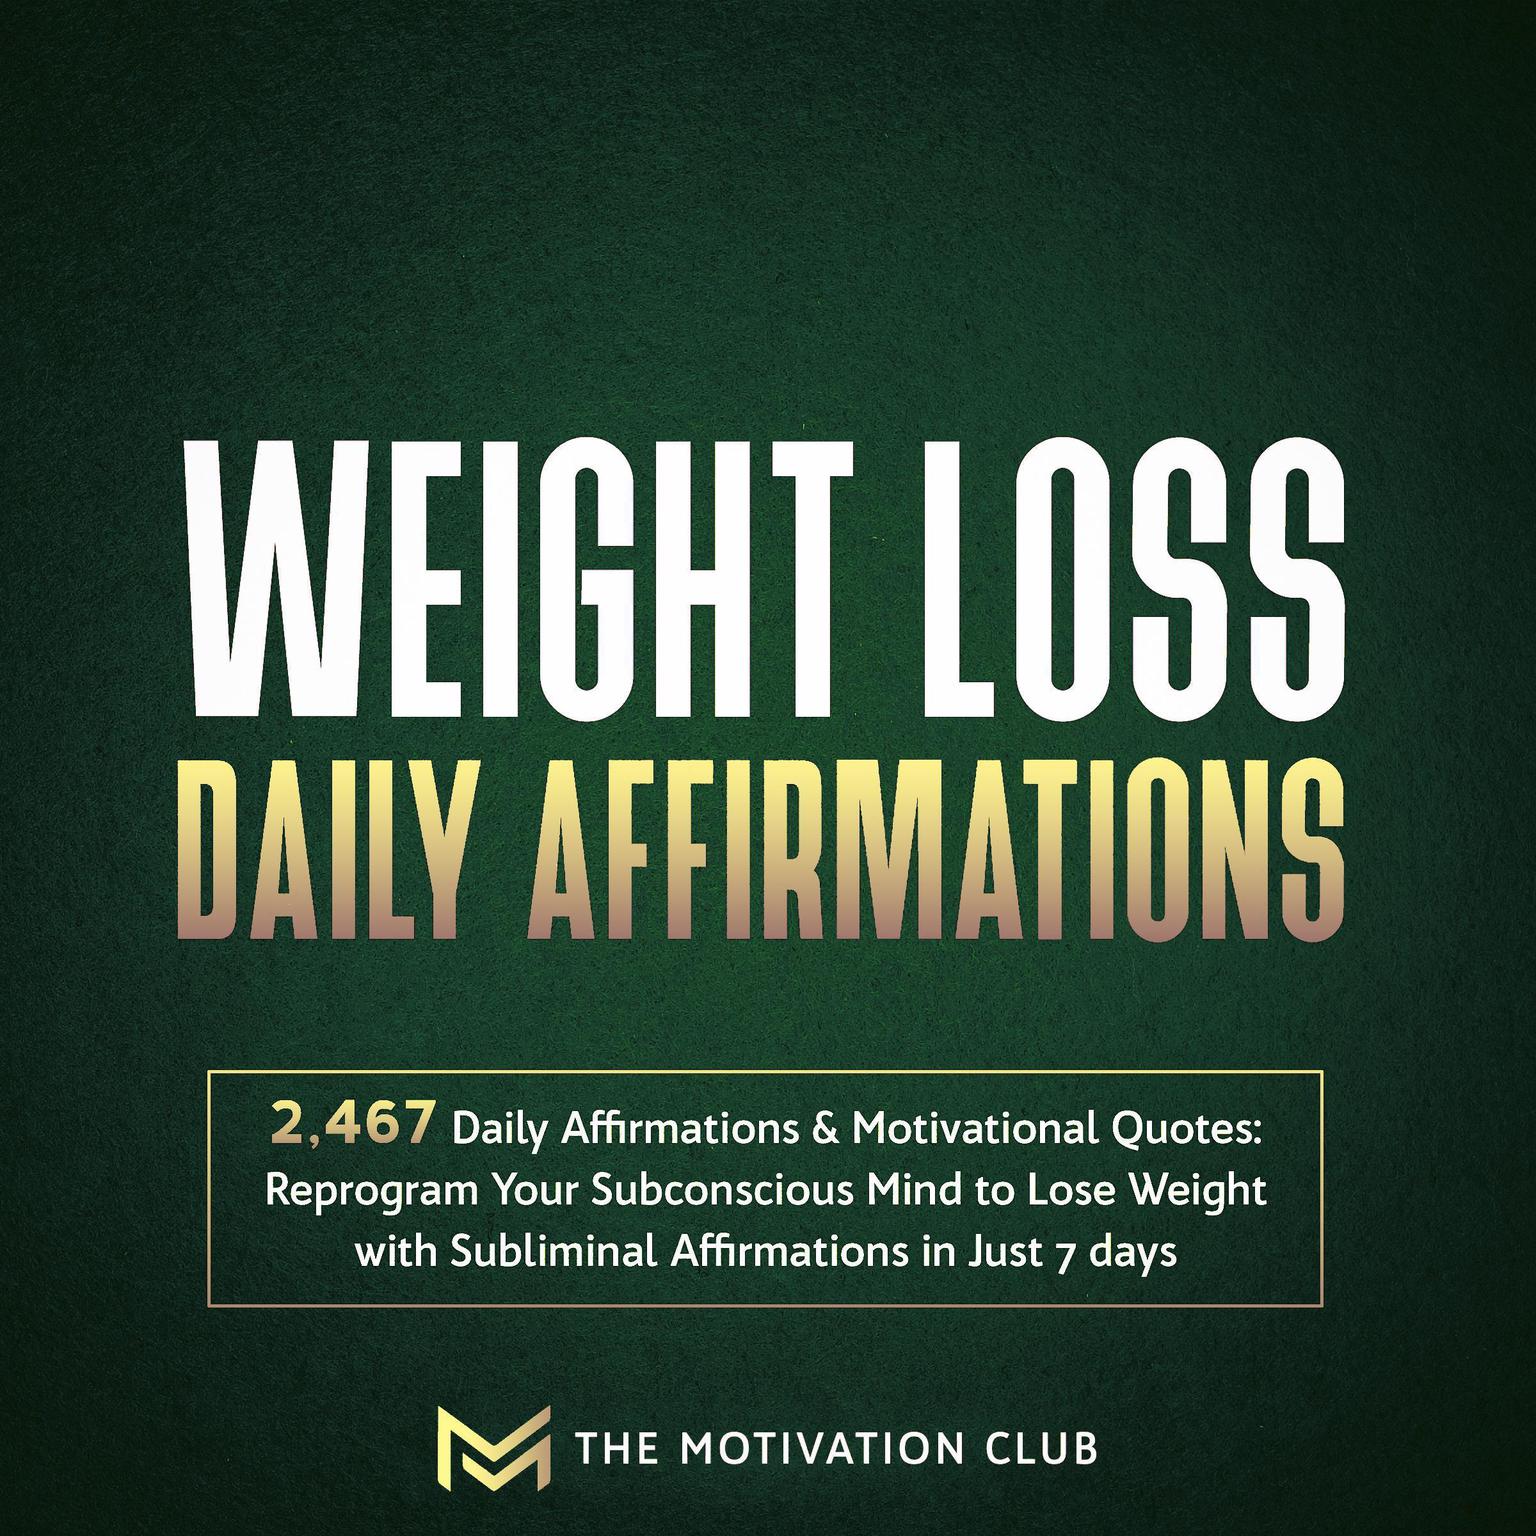 Weight Loss Daily Affirmations: 2,467 Daily Affirmations and Motivational Quotes Reprogram Your Subconscious Mind to Lose Weight with Subliminal Affirmations in Just 7 days Audiobook, by The Motivation Club